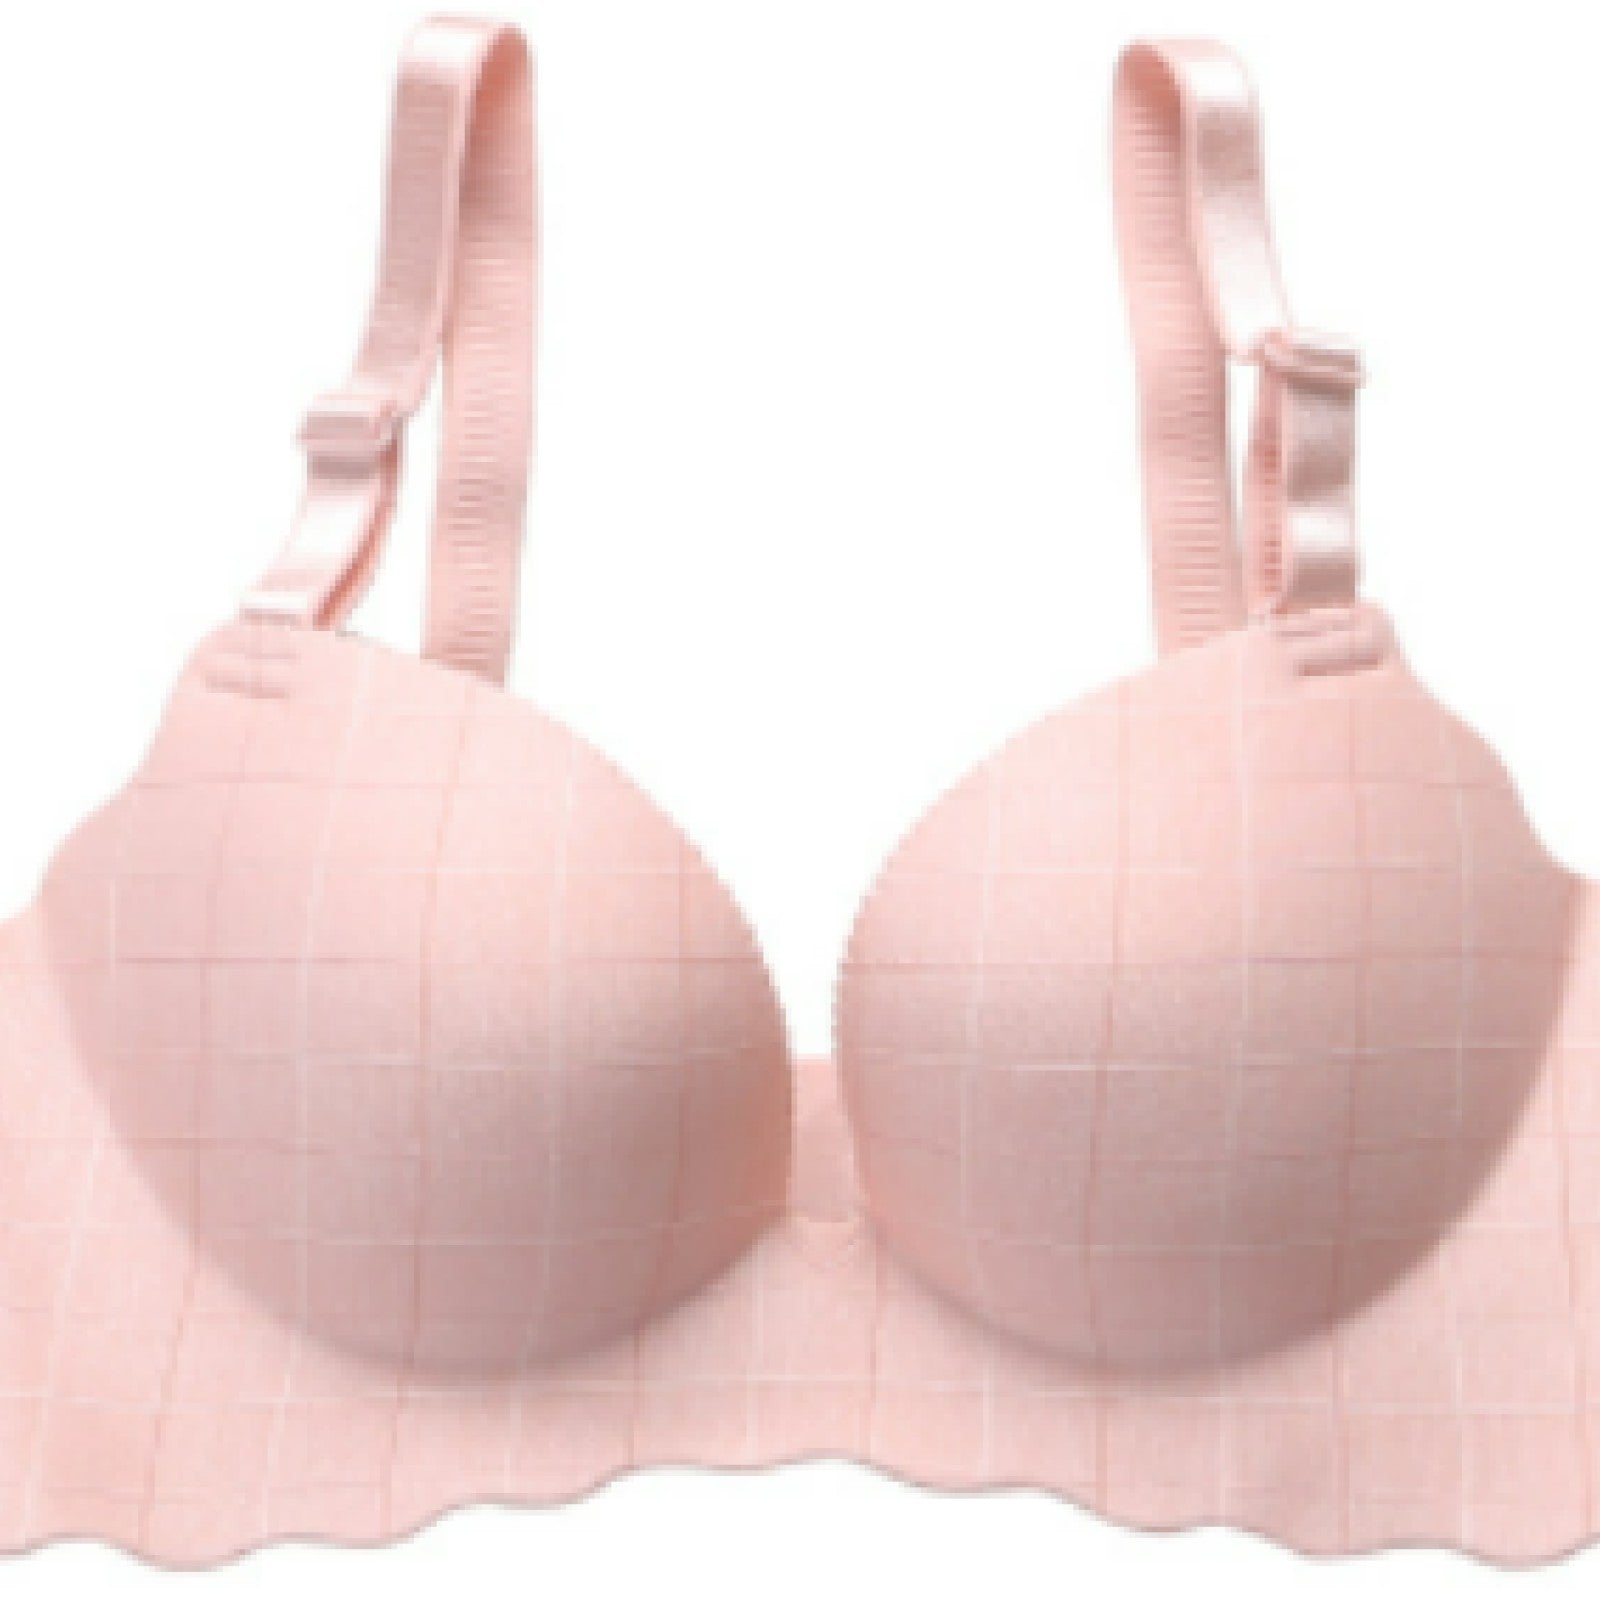 Heavily-Padded Bra with Bow